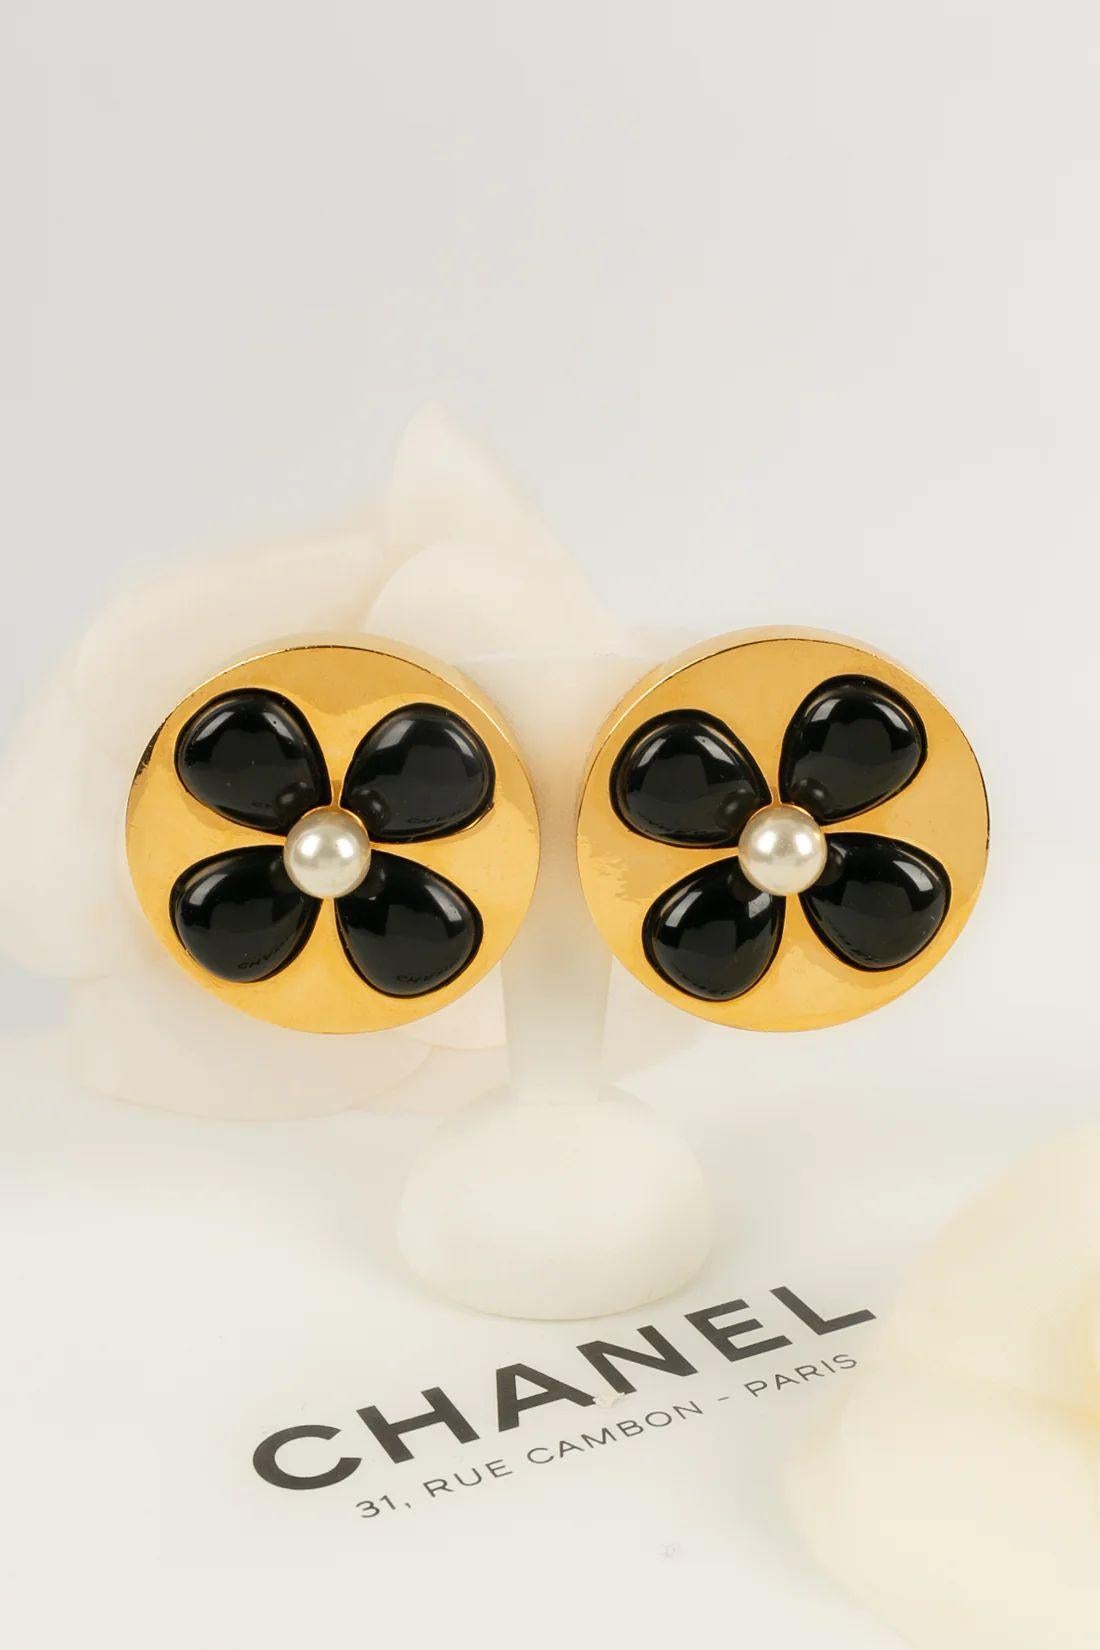 Chanel - (Made in France) Earrings clips in gold metal, resin and pearly cabochon. Collection 2cc3.

Additional information:
Dimensions: Ø 4.5 cm

Condition: 
Very good condition

Seller Ref number: BOB220